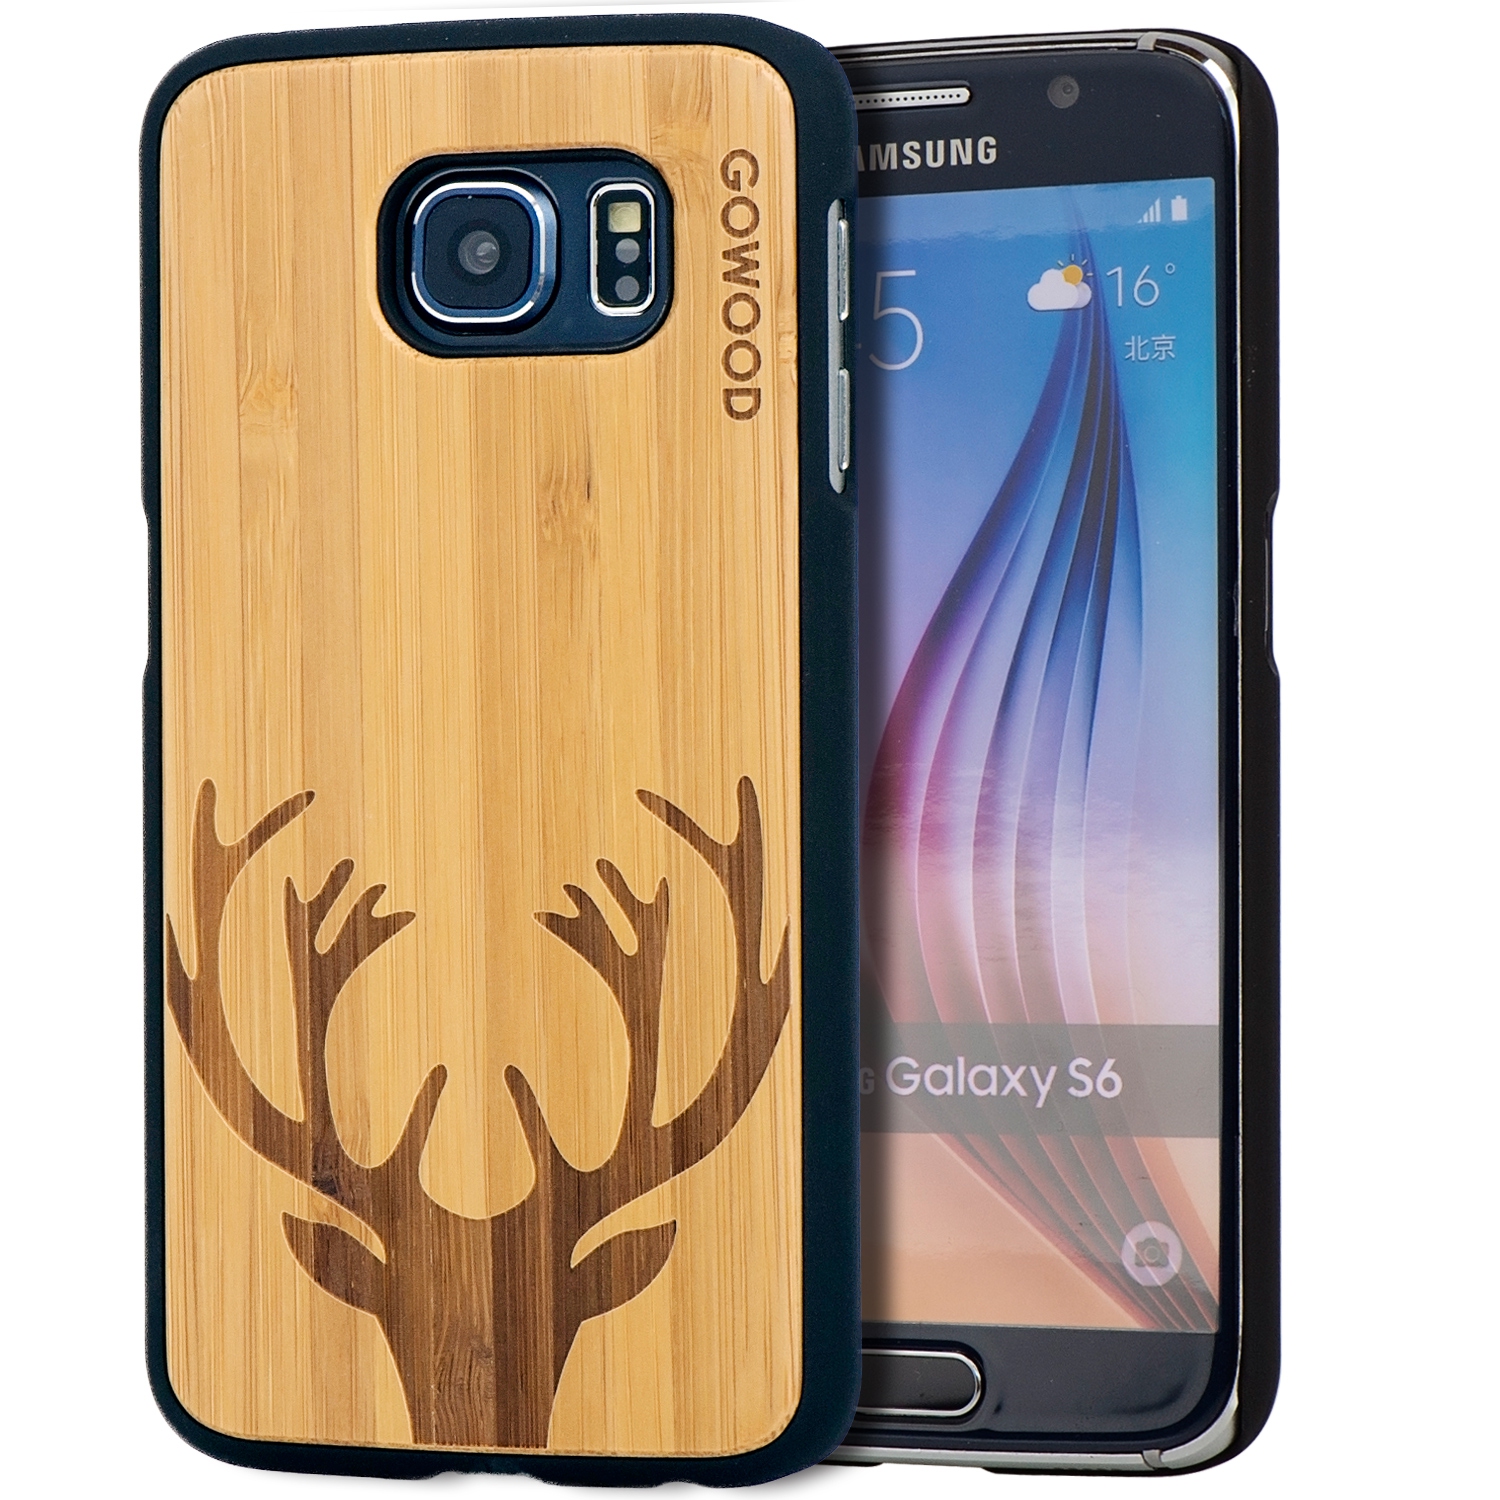 Samsung Galaxy S6 Wood Case | Real Bamboo Deer Design Engraved and Durable Polycarbonate Shockproof Bumper with Rubber Coating